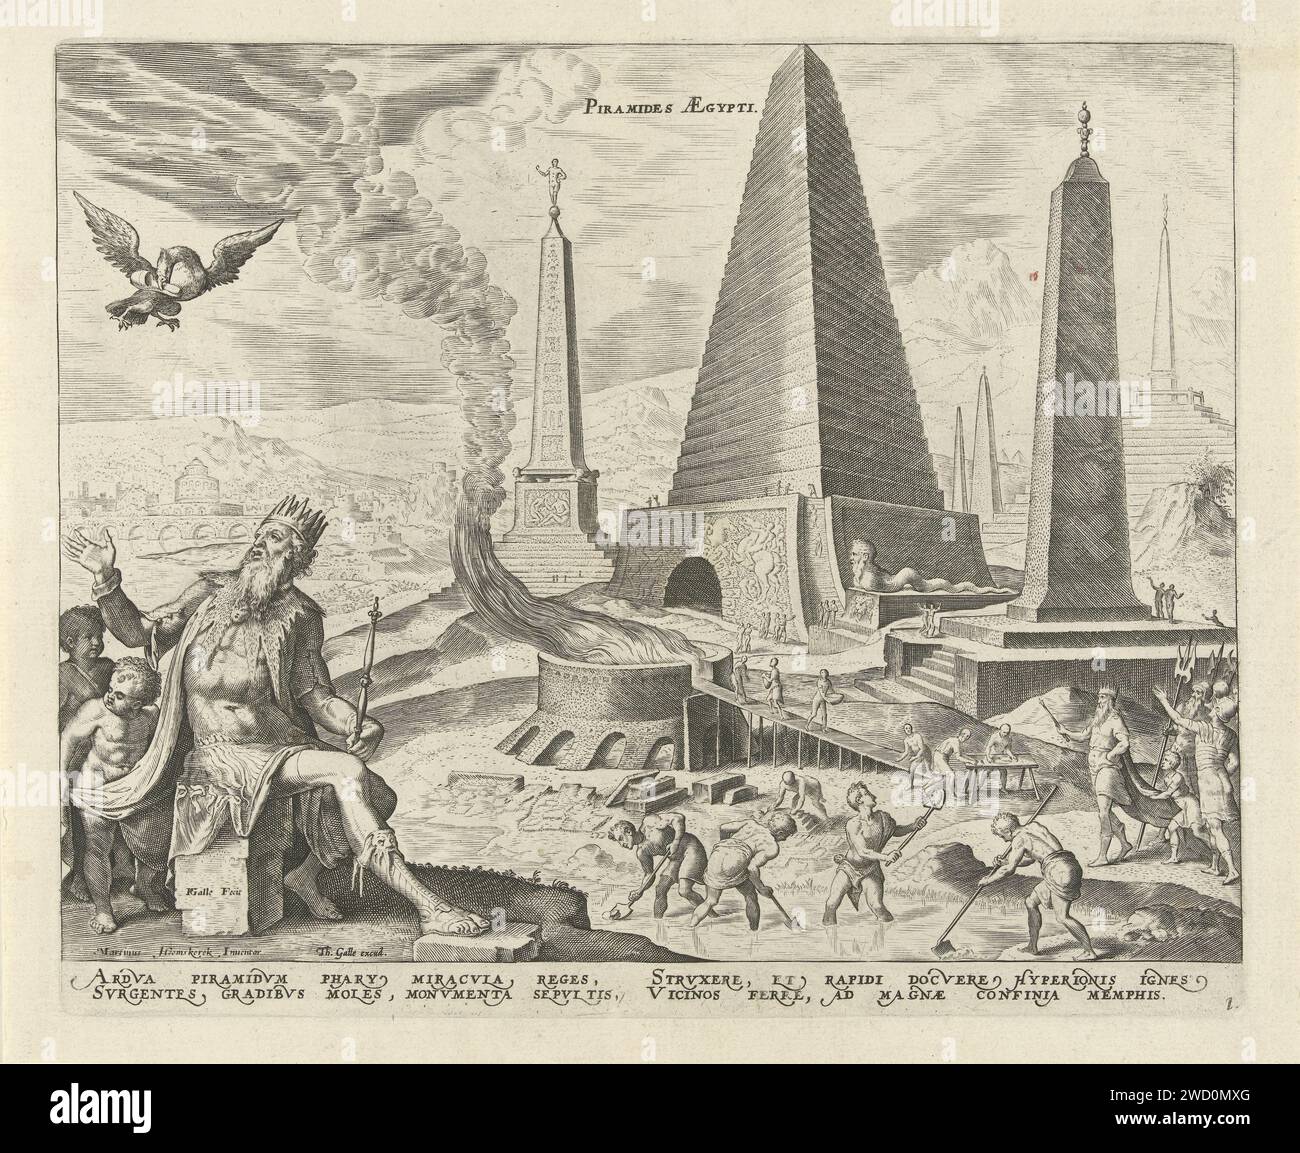 Pyramids of Egypt, Philips Galle, After Maarten van Heemskerck, 1581 - 1633 print In the background Egyptian pyramids and obelisks. Men made to slave scoop clay from the river, which are then baked into stones in a burning oven for the buildings. In the foreground, Pharaoh Psammetiches is on a stone block. He looks at an eagle with a sandal in his mouth. This image refers to a fable of Aesopus about the relationship between Rhodopis, a young Egyptian woman, and the Pharaoh. The print has a Latin caption and is part of a series about the eight wonders of the world. print maker: Antwerpafter des Stock Photo